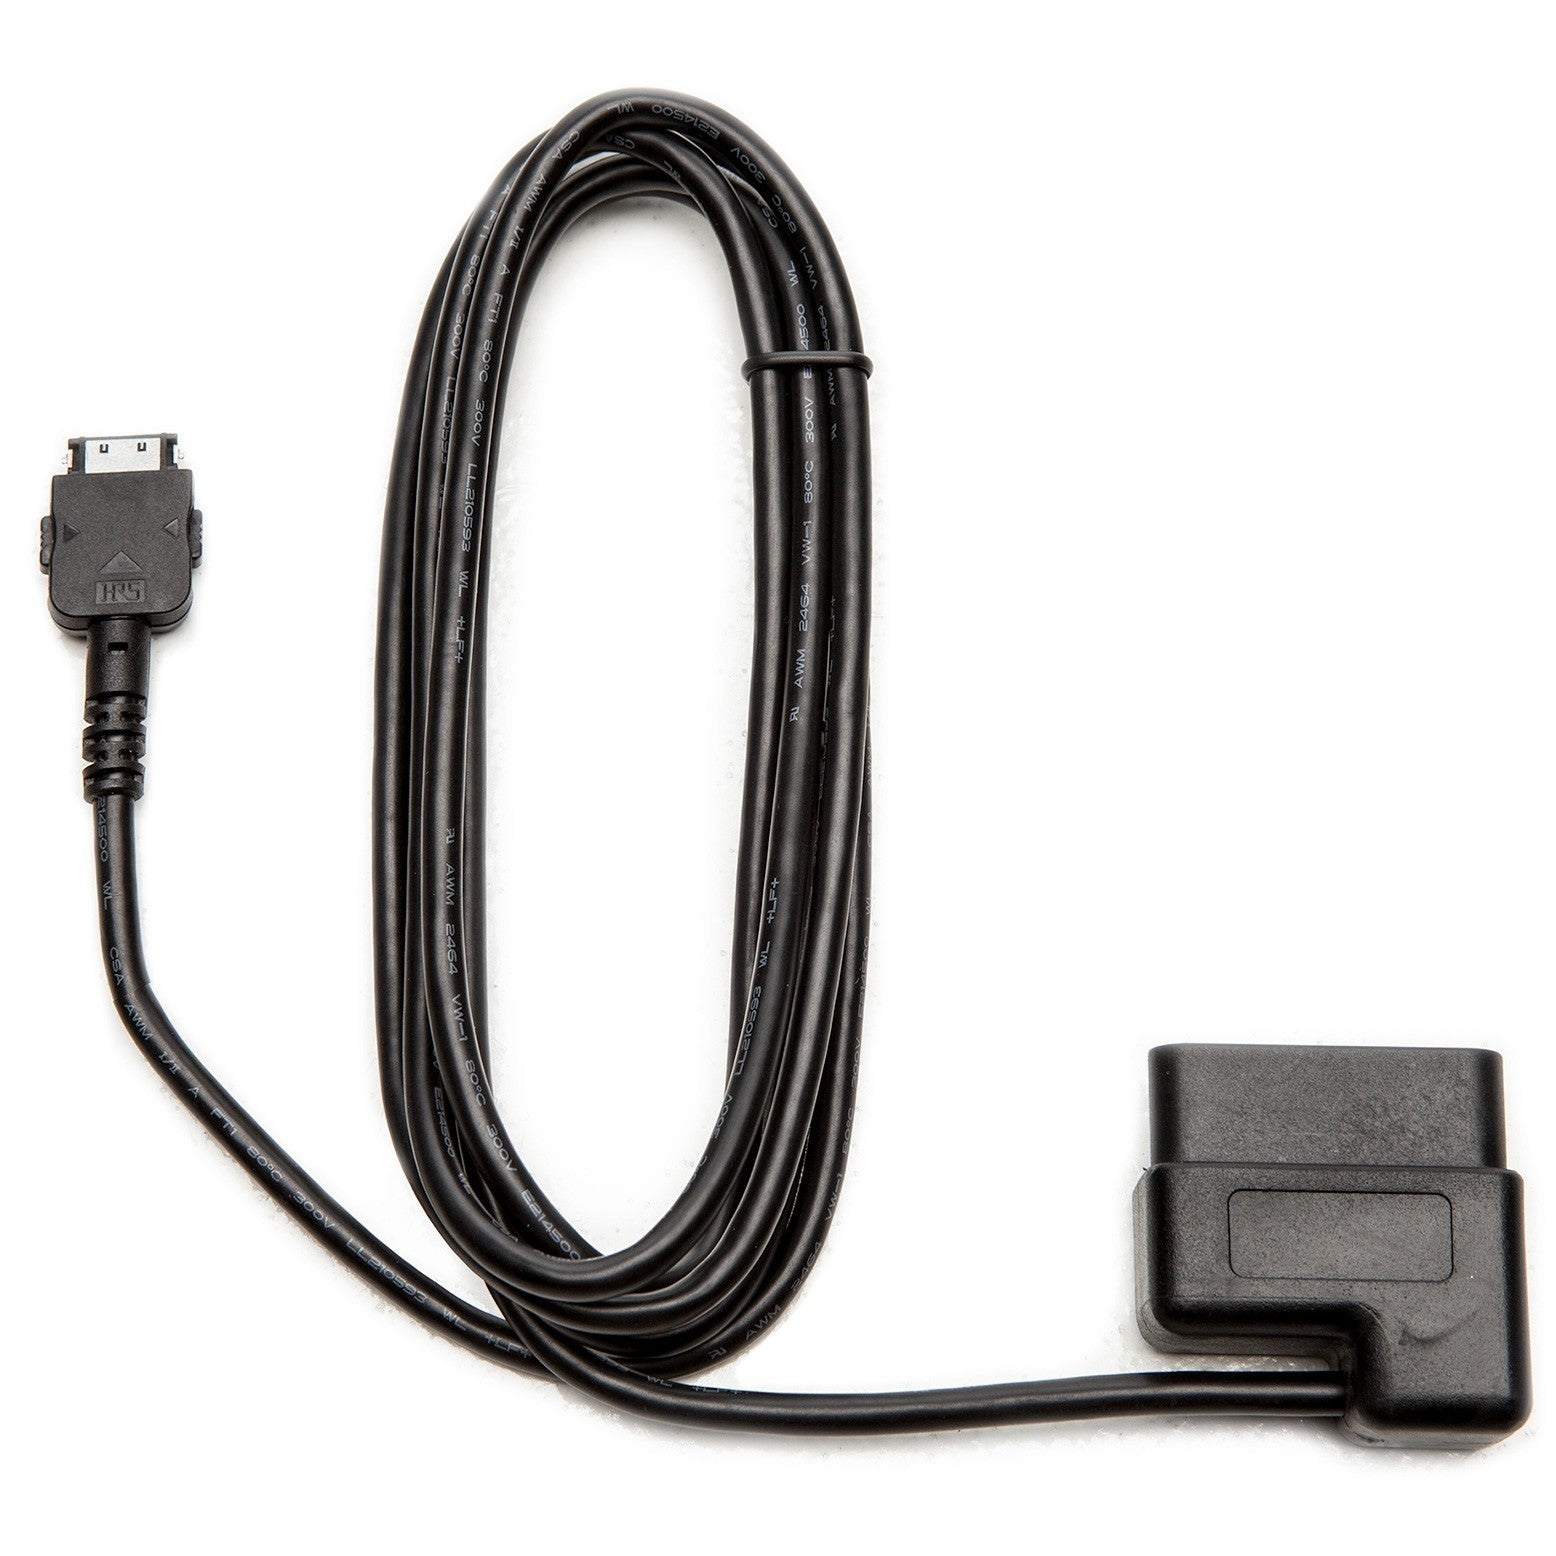 COBB AP3-OBDII-CABLE-UNIVERSAL AP3 OBD2 UNIVERSAL Cable Photo-0 